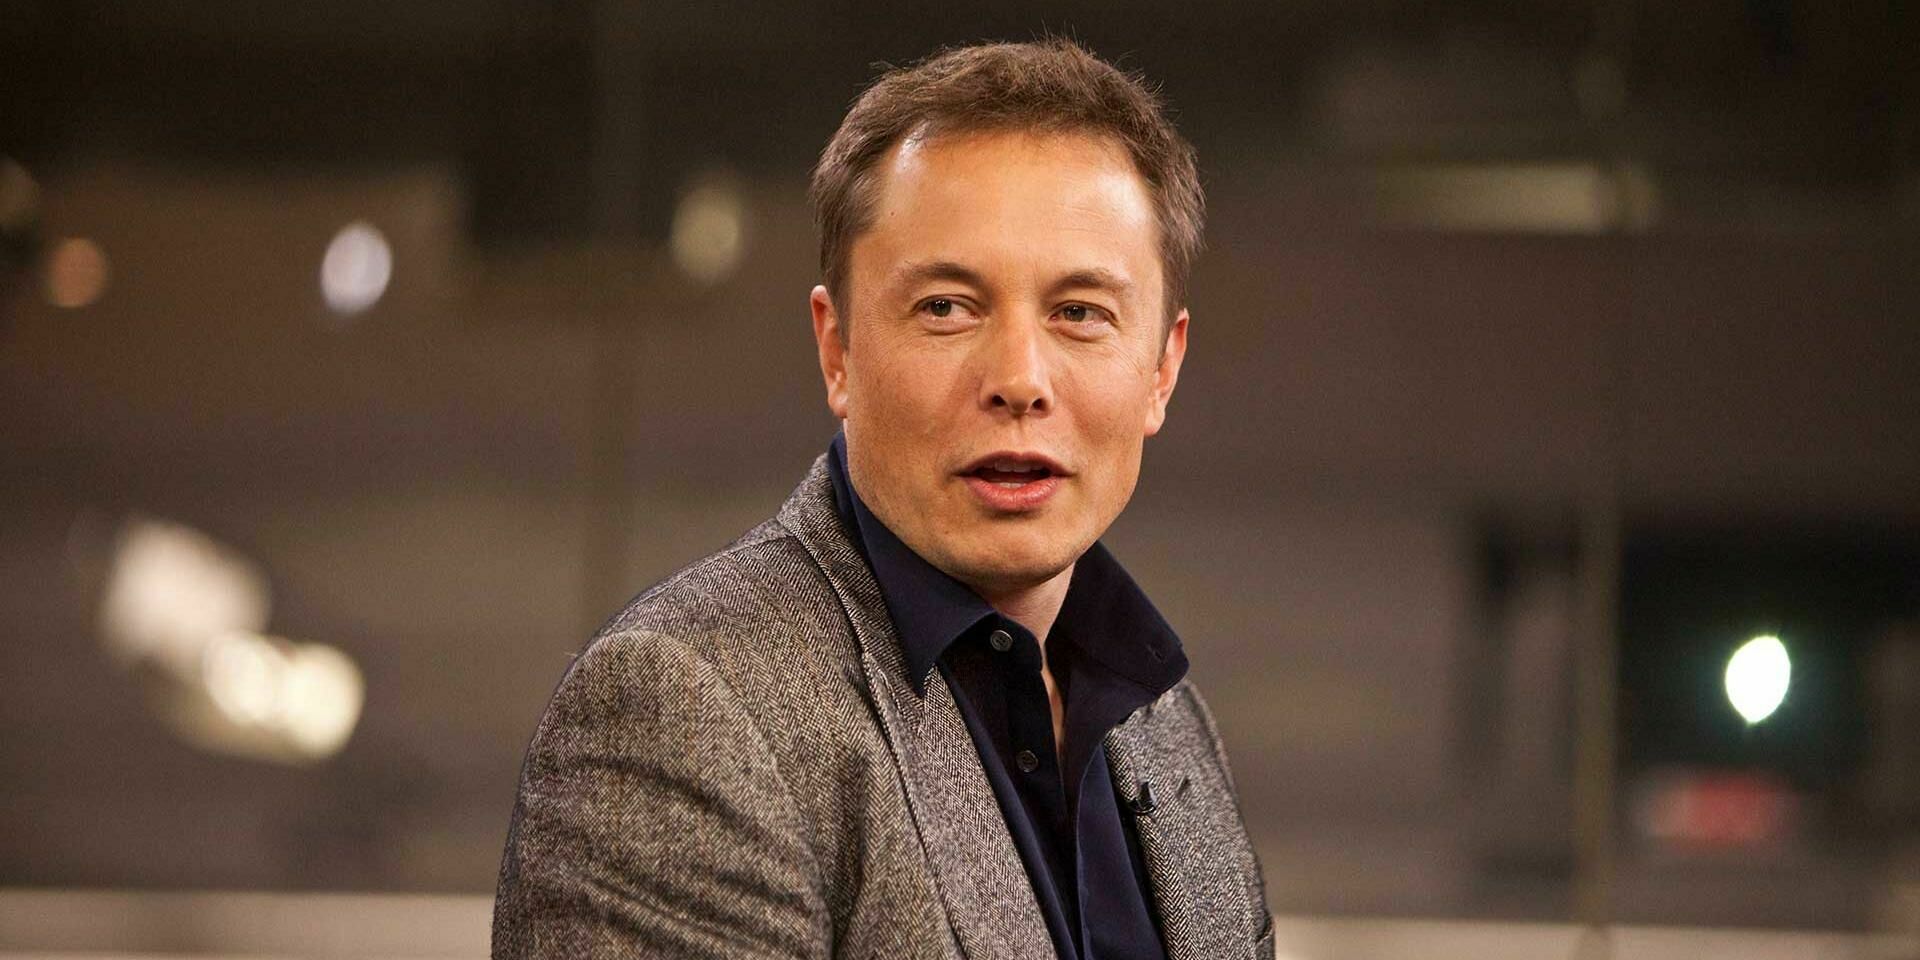 Elon Musk passed four tests for coronavirus in one day and received different results